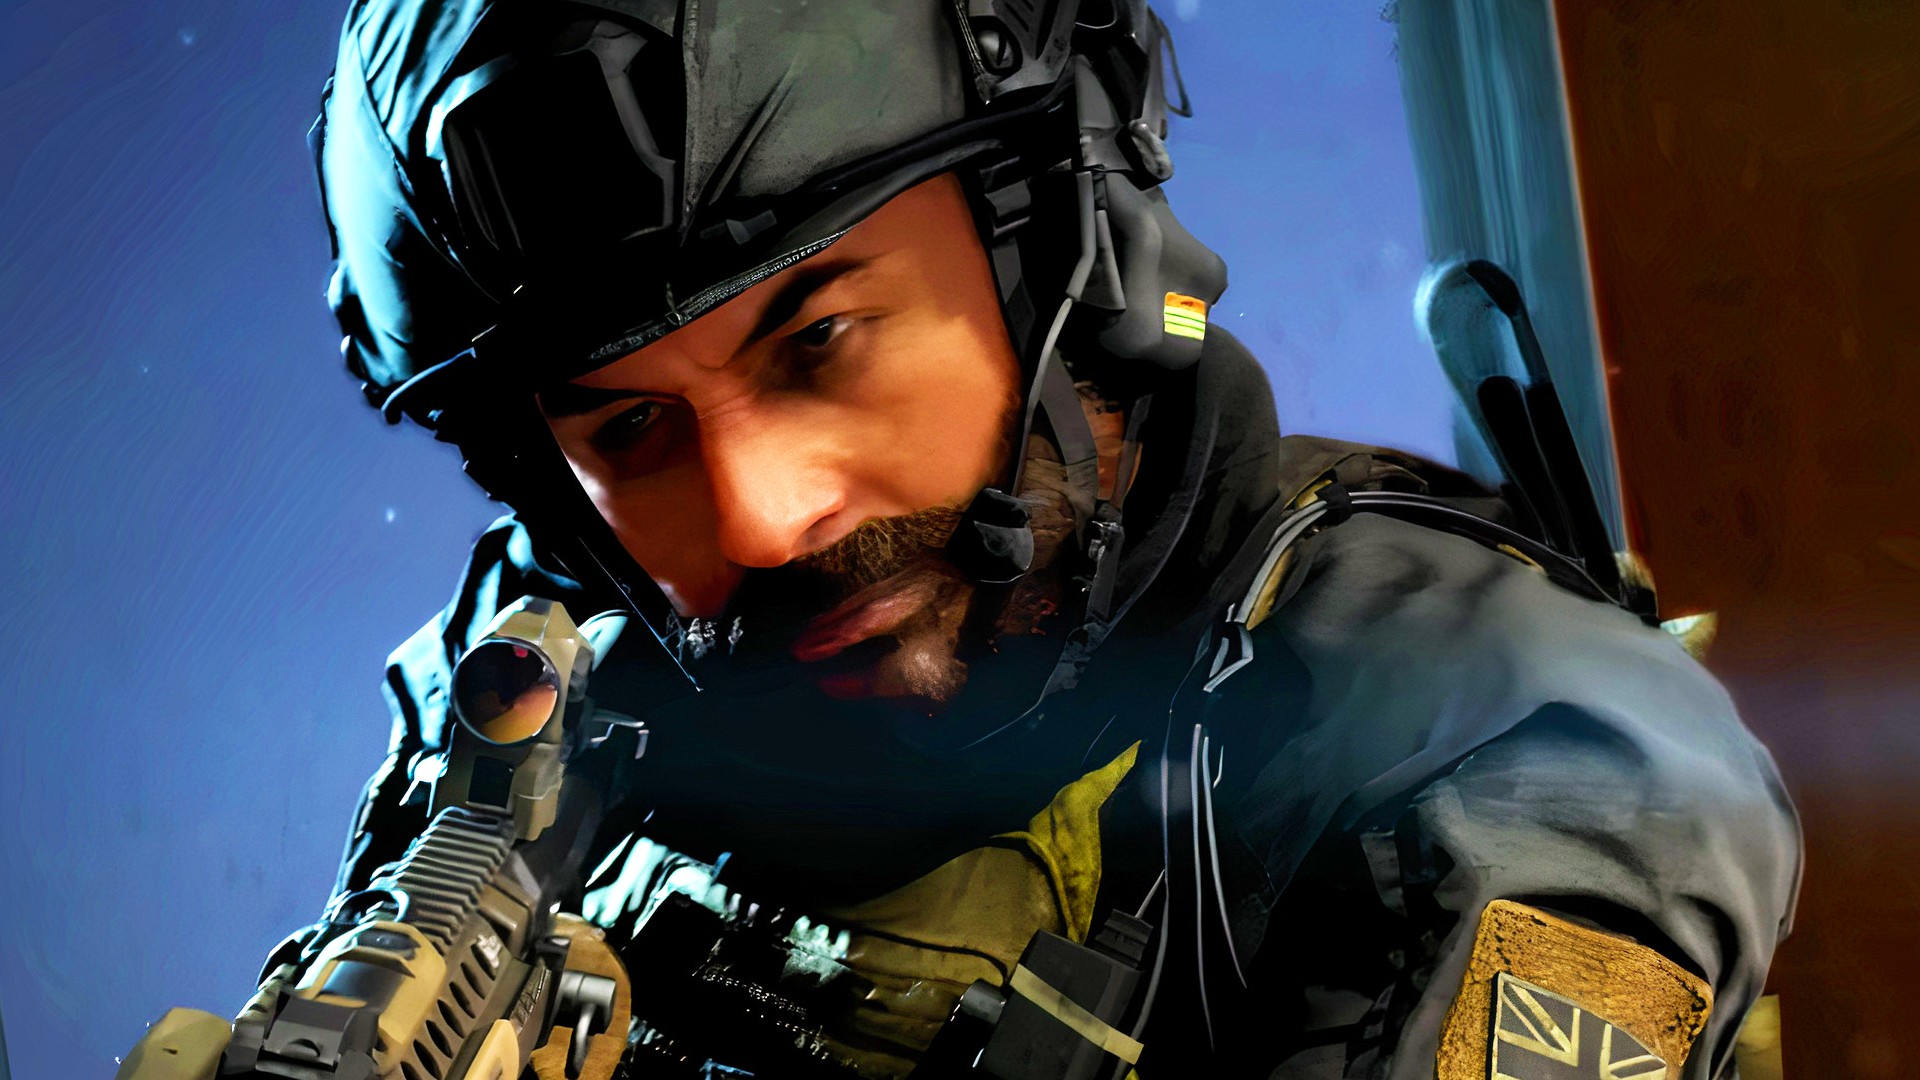 Call of Duty: Modern Warfare at the best price